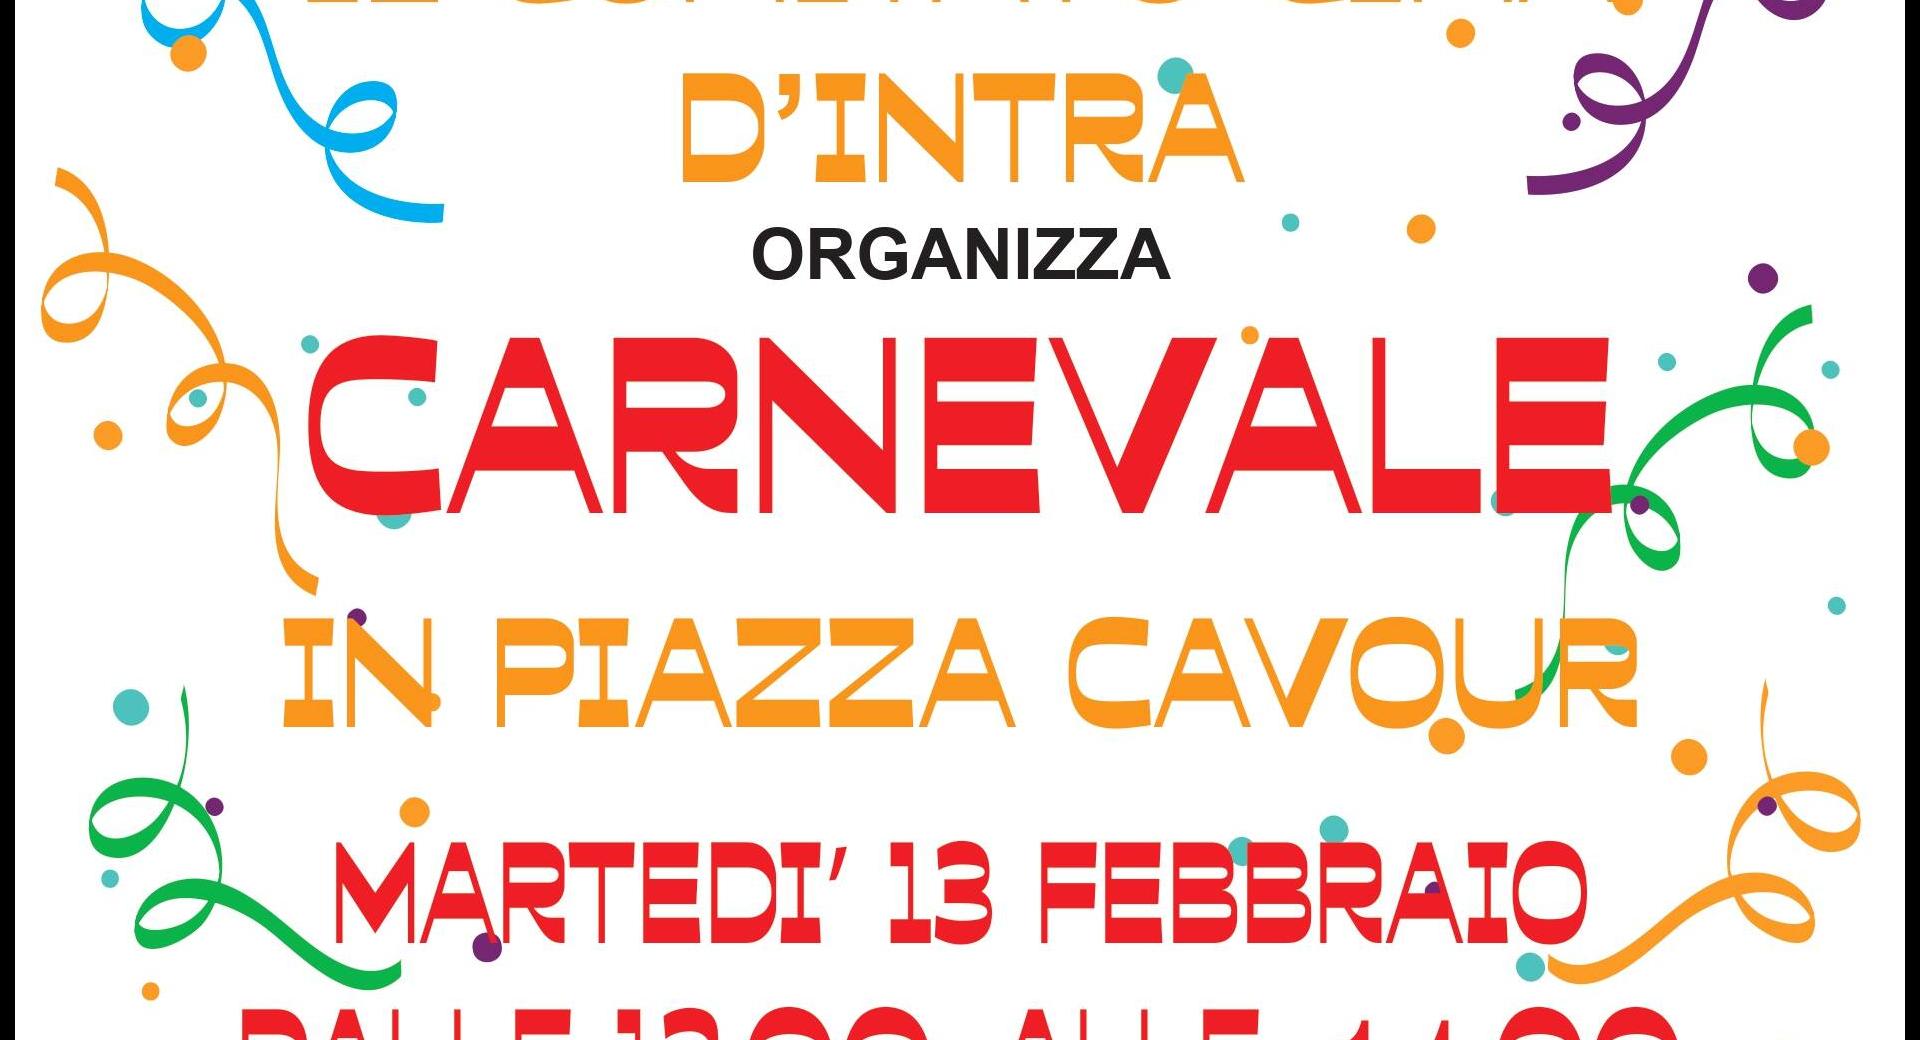 Carnevale in Piazza Cavour